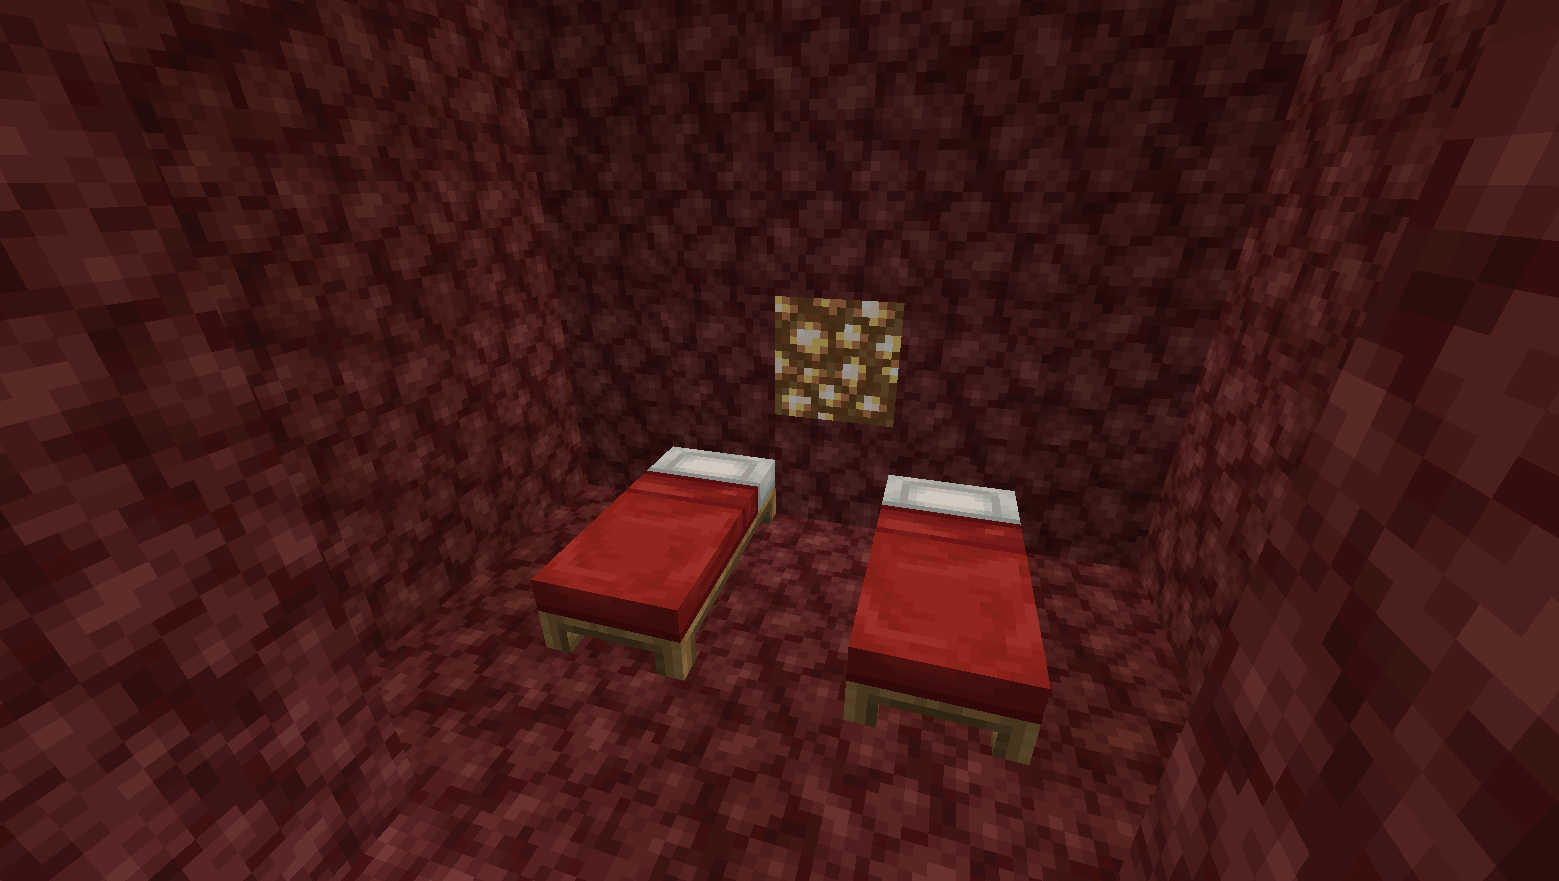 Bed Mining in the Nether